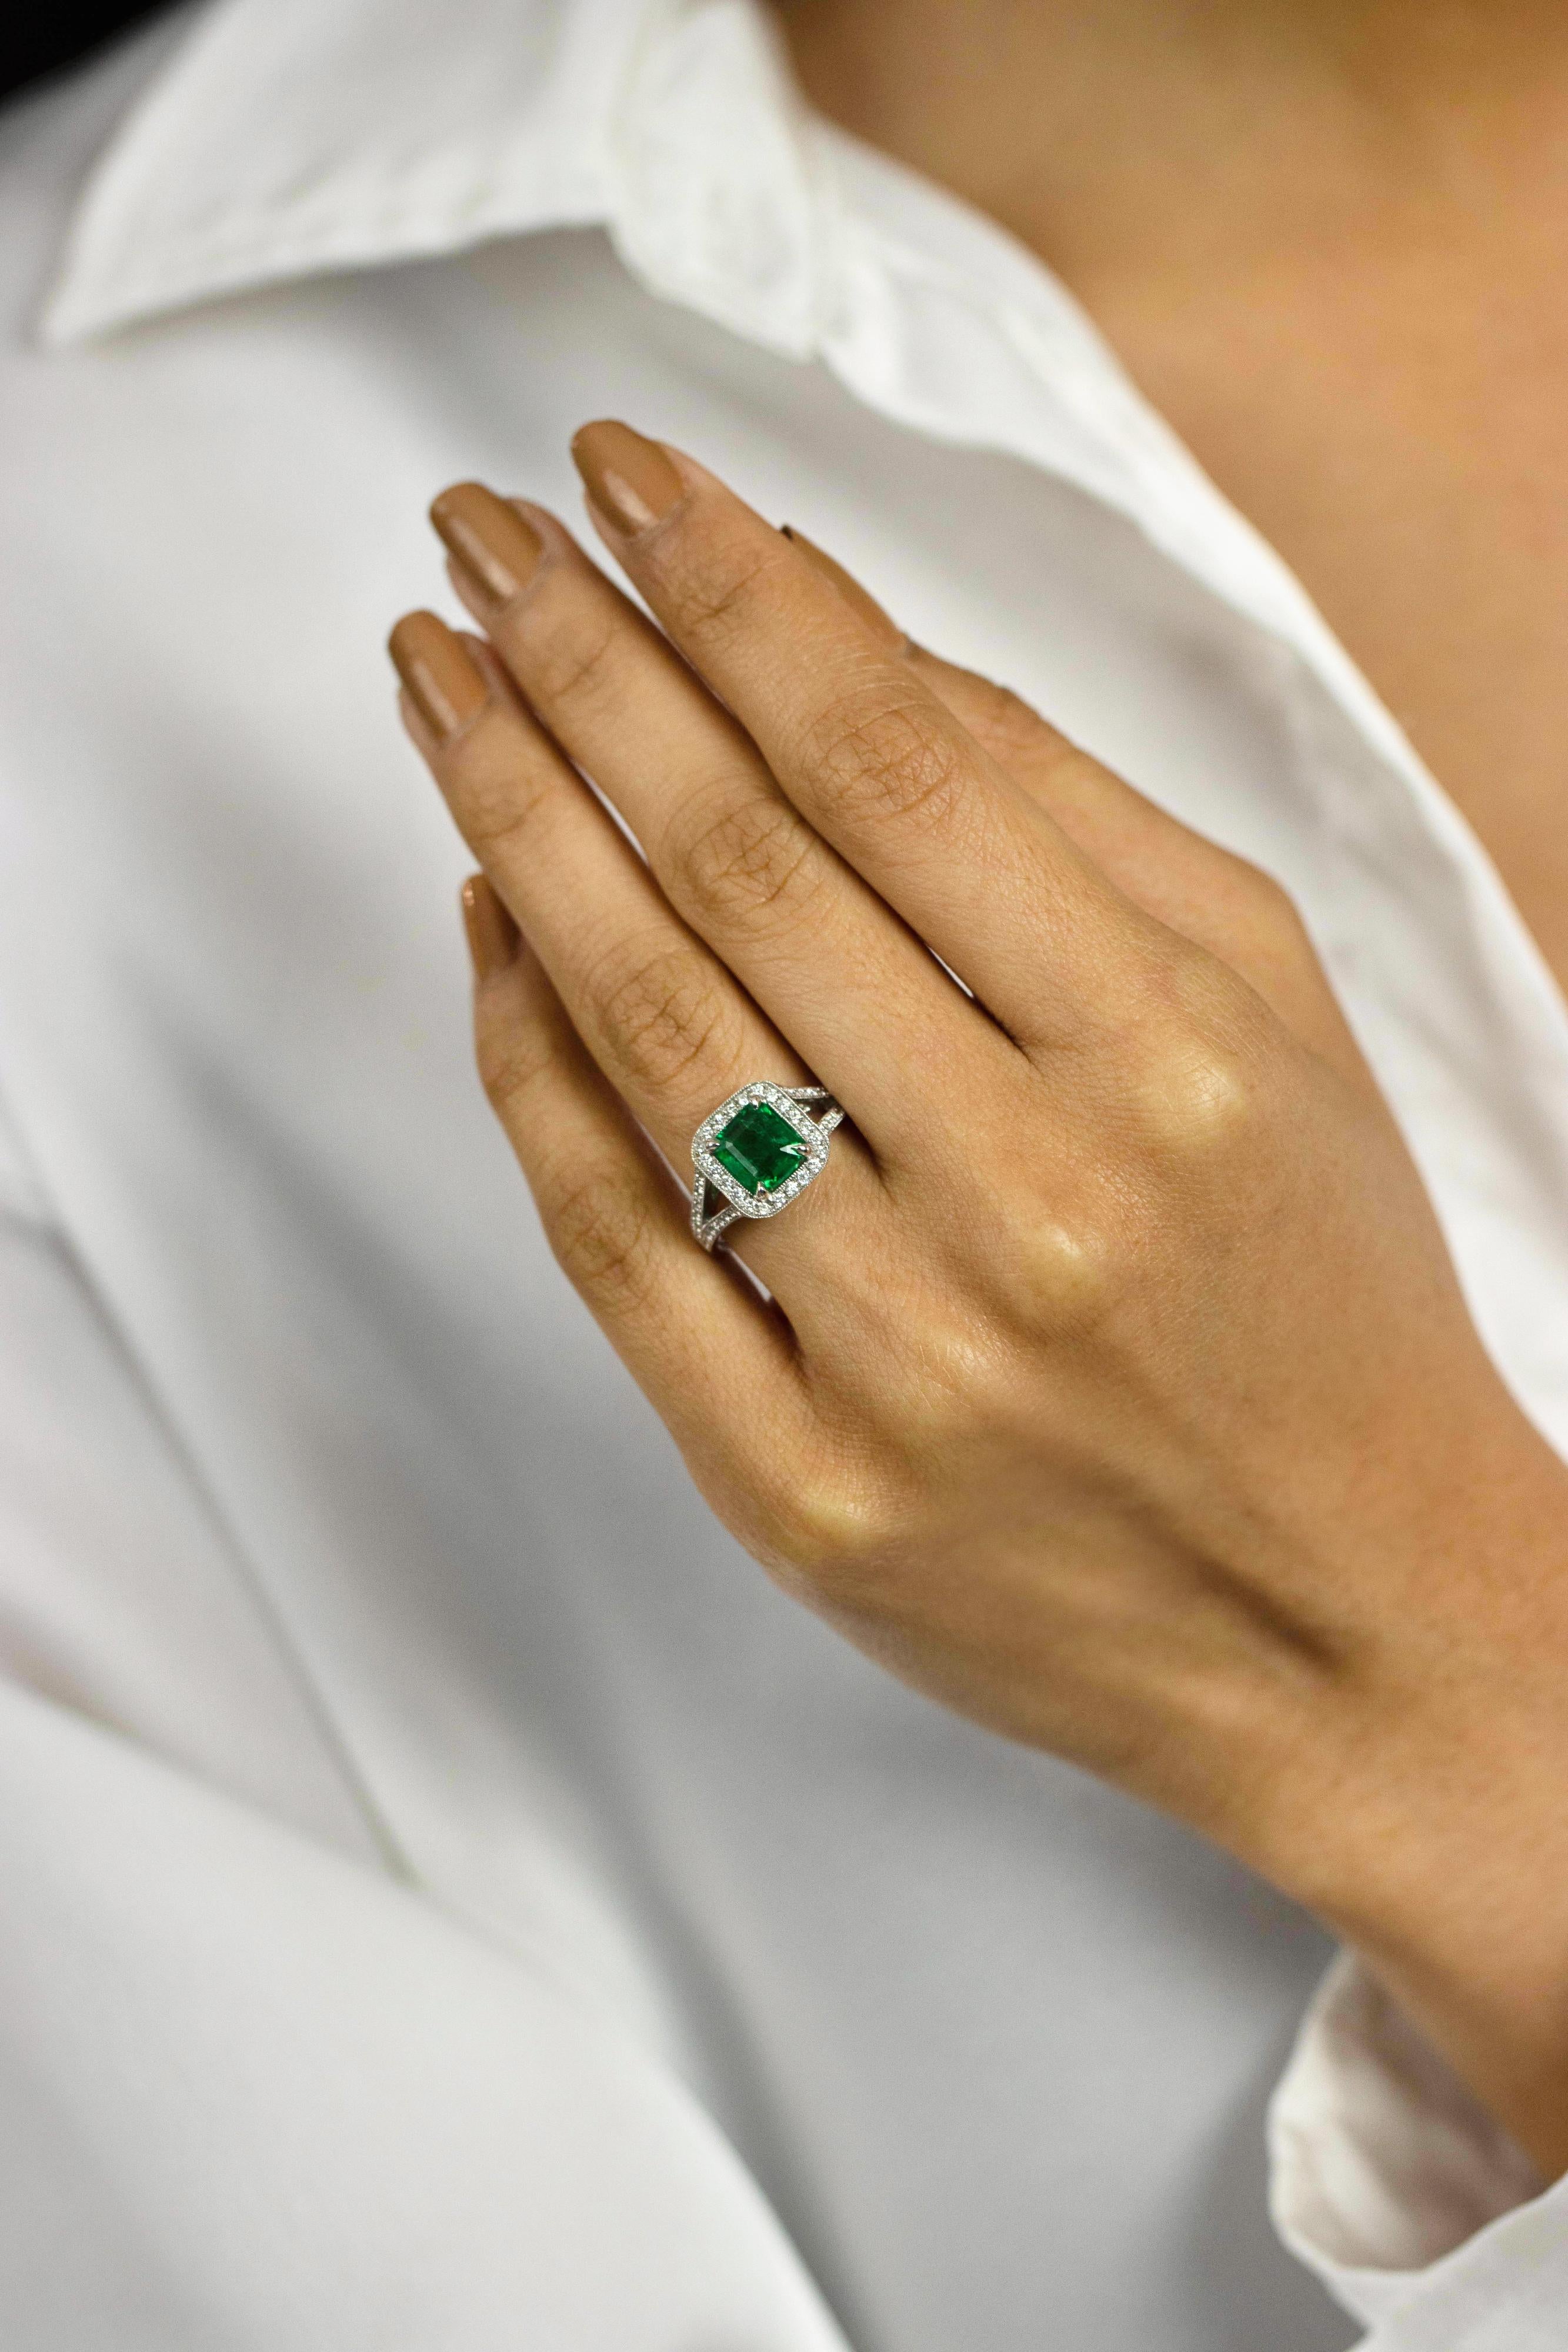 Contemporary Roman Malakov 1.68 Carats Emerald Cut Emerald with Diamond Halo Engagement Ring For Sale